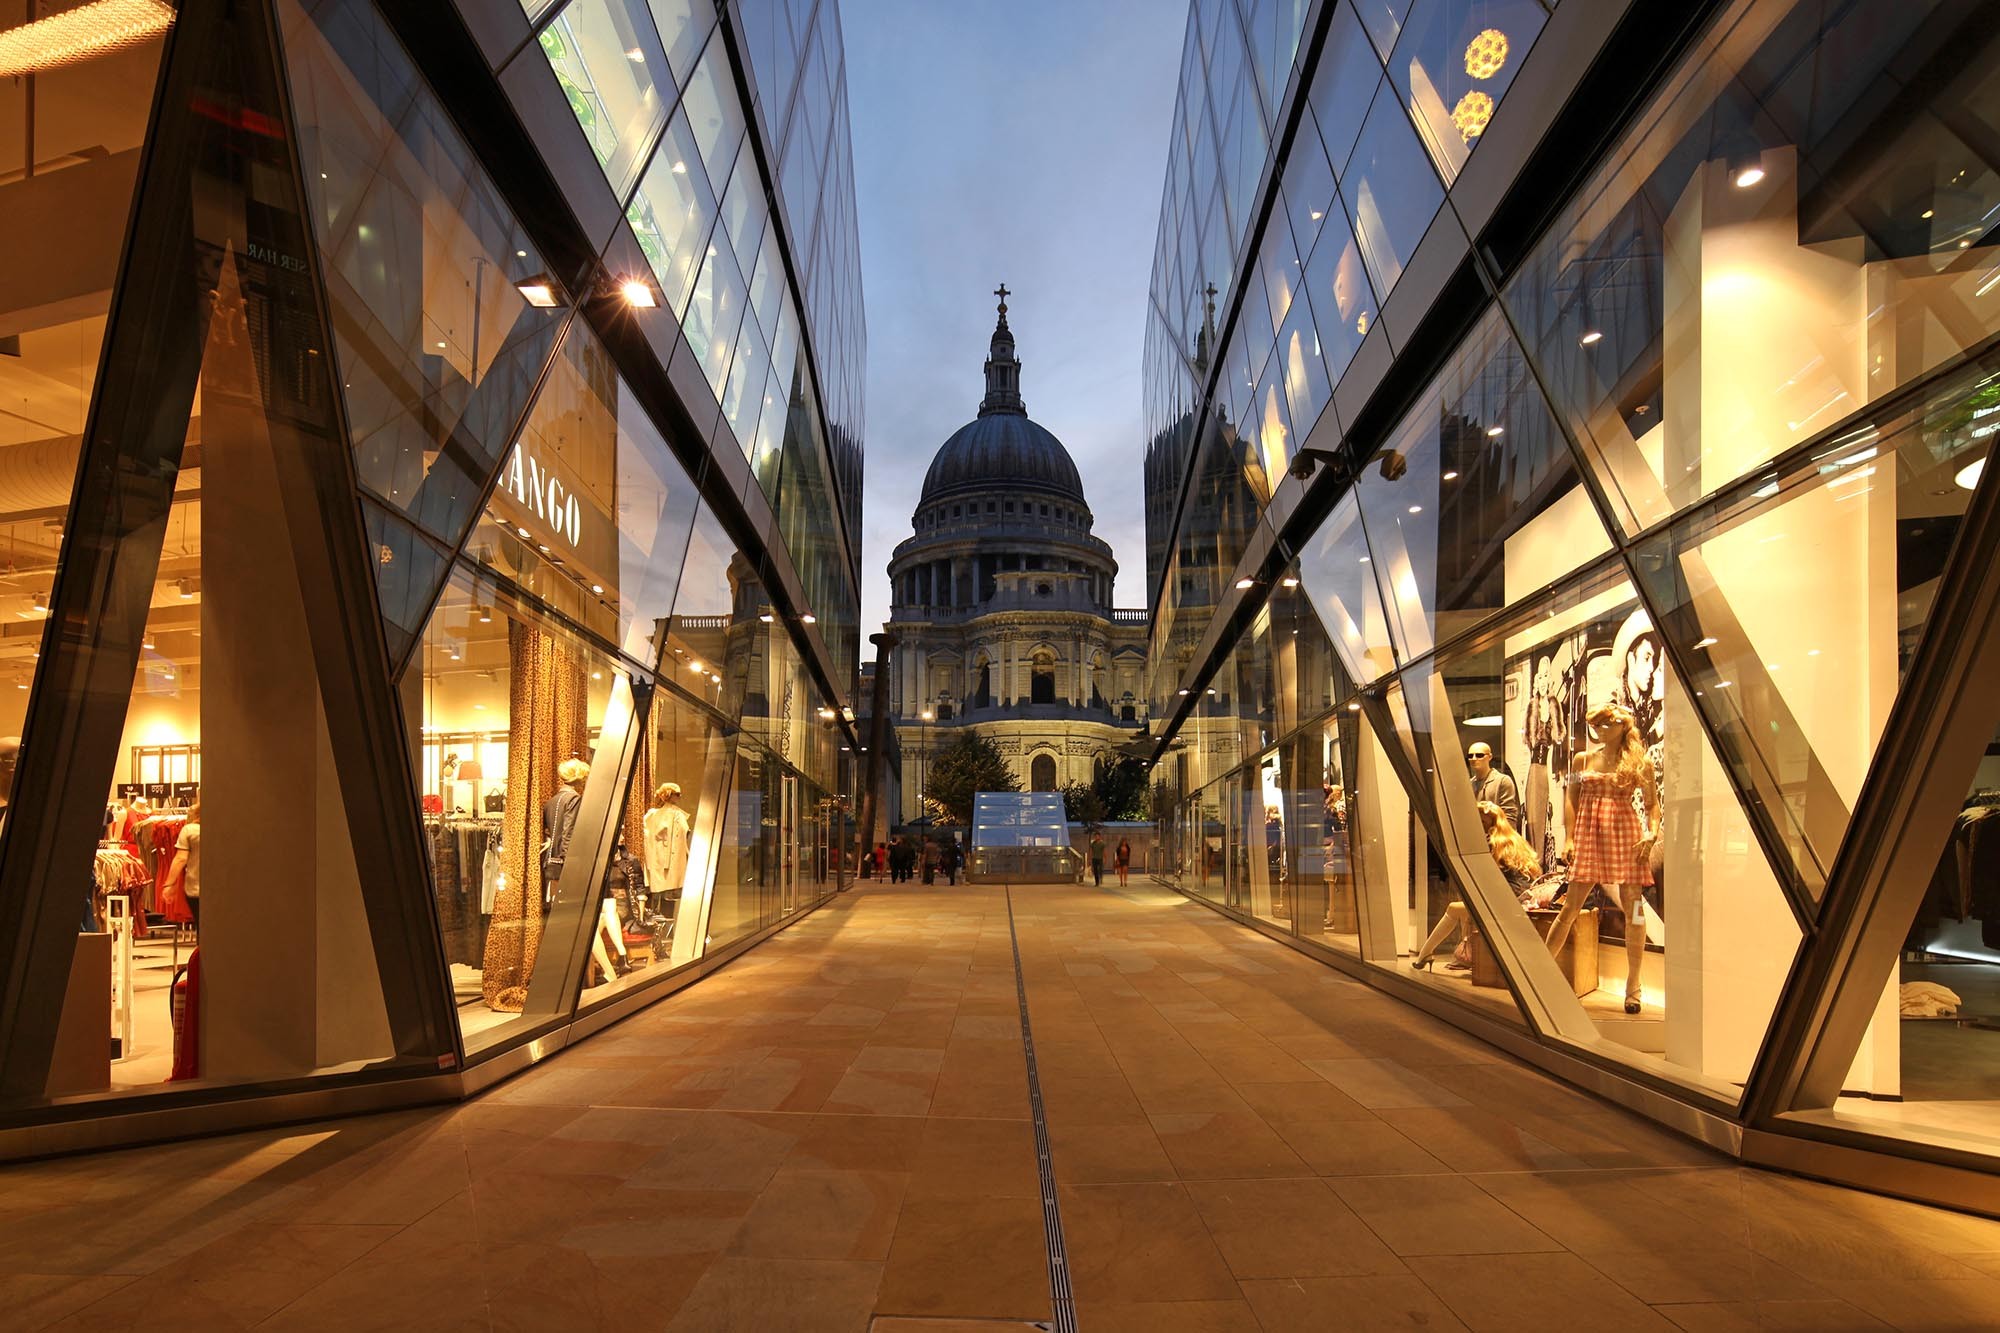 Clothes shops opposite St. Paul's Cathedral in London